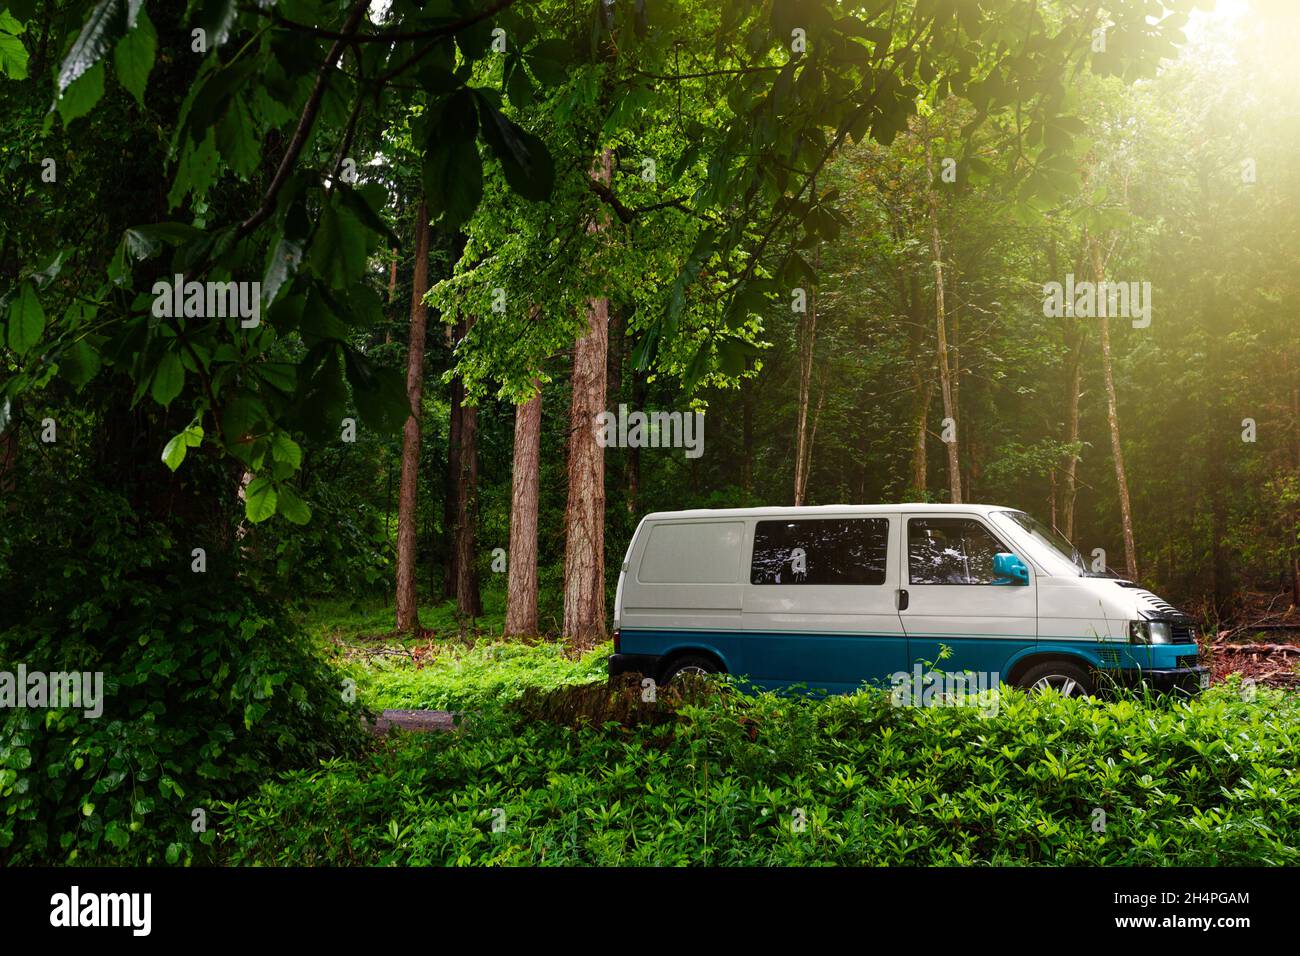 T4 Transporter van in a forest with the sun shining through Stock Photo